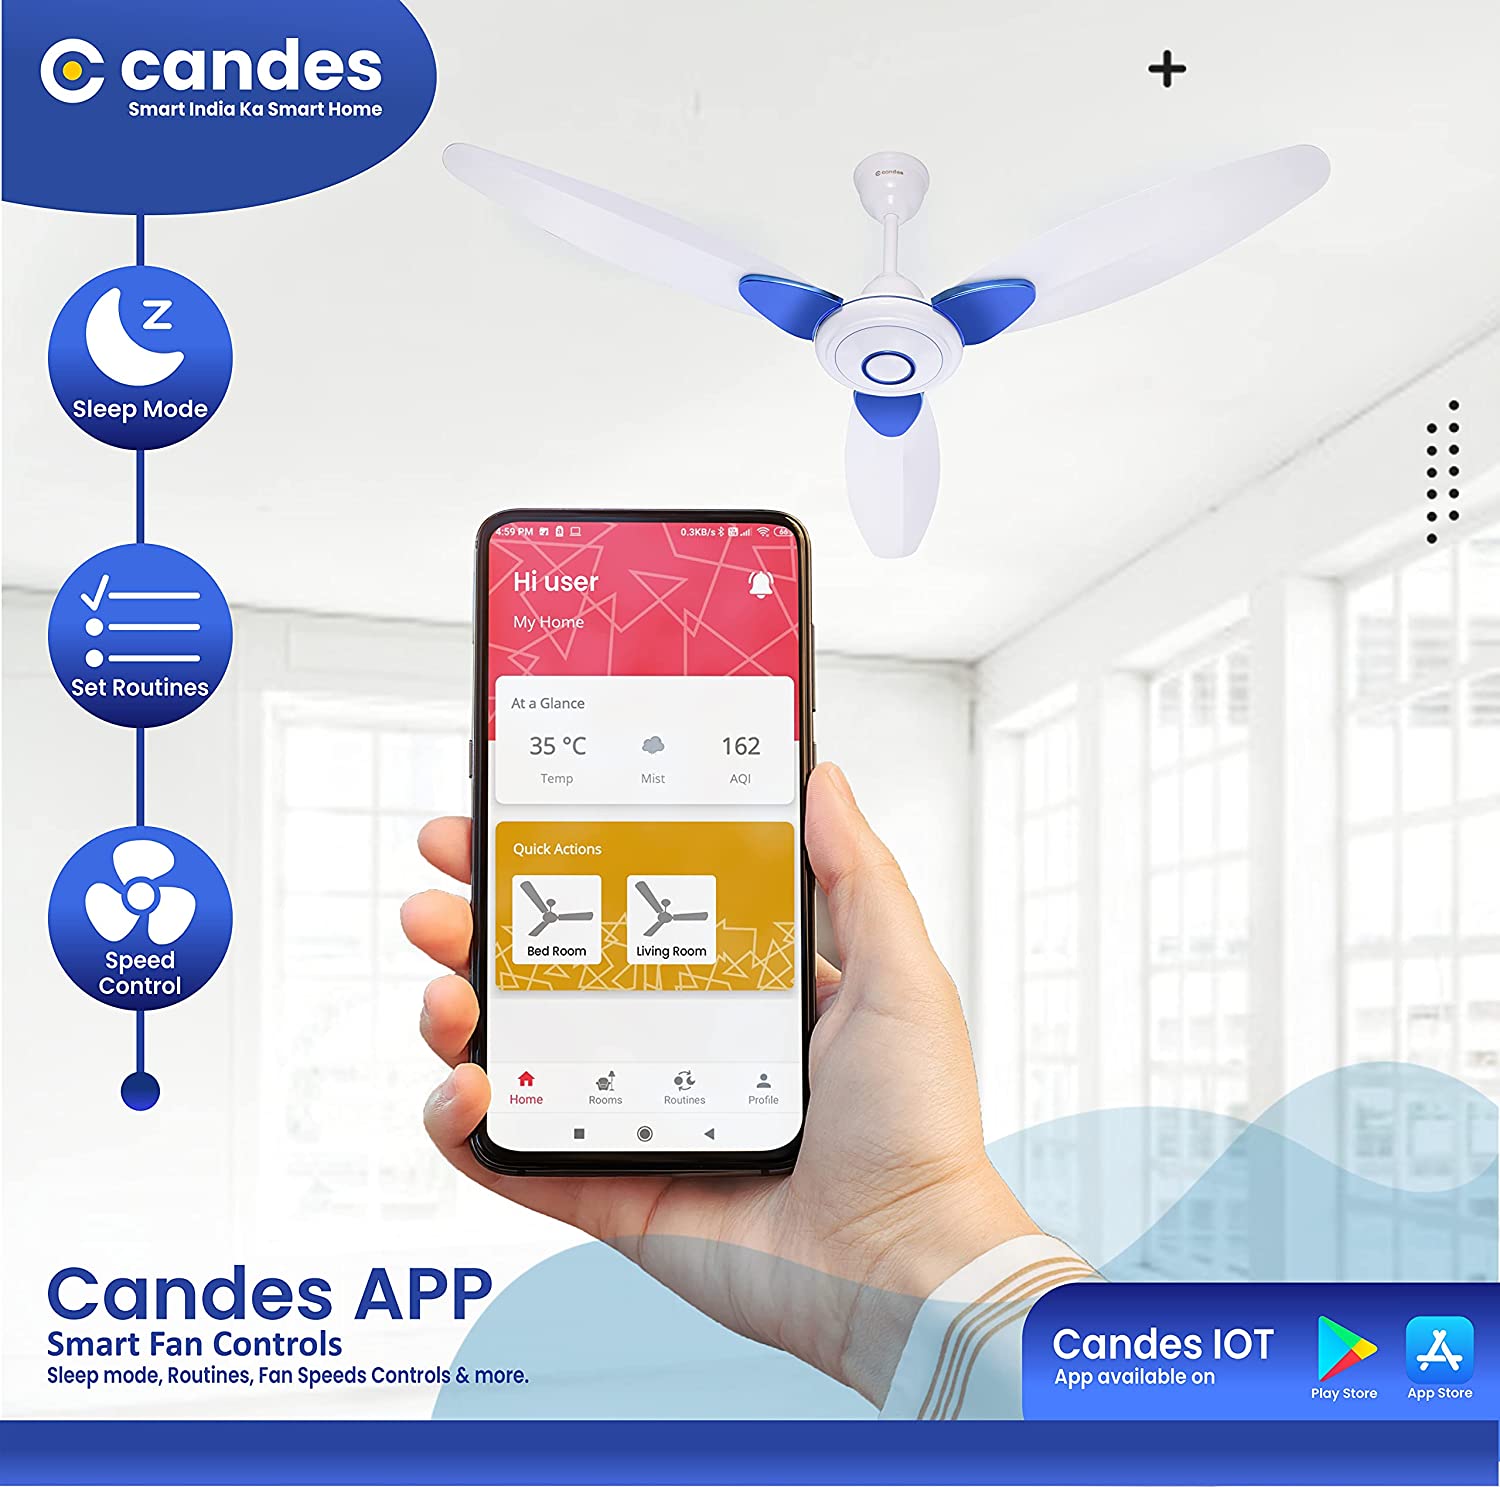 Candes IOT Smart Wi-Fi - Works With Alexa, Google Assistant, Remote & Candes App (White Blue)